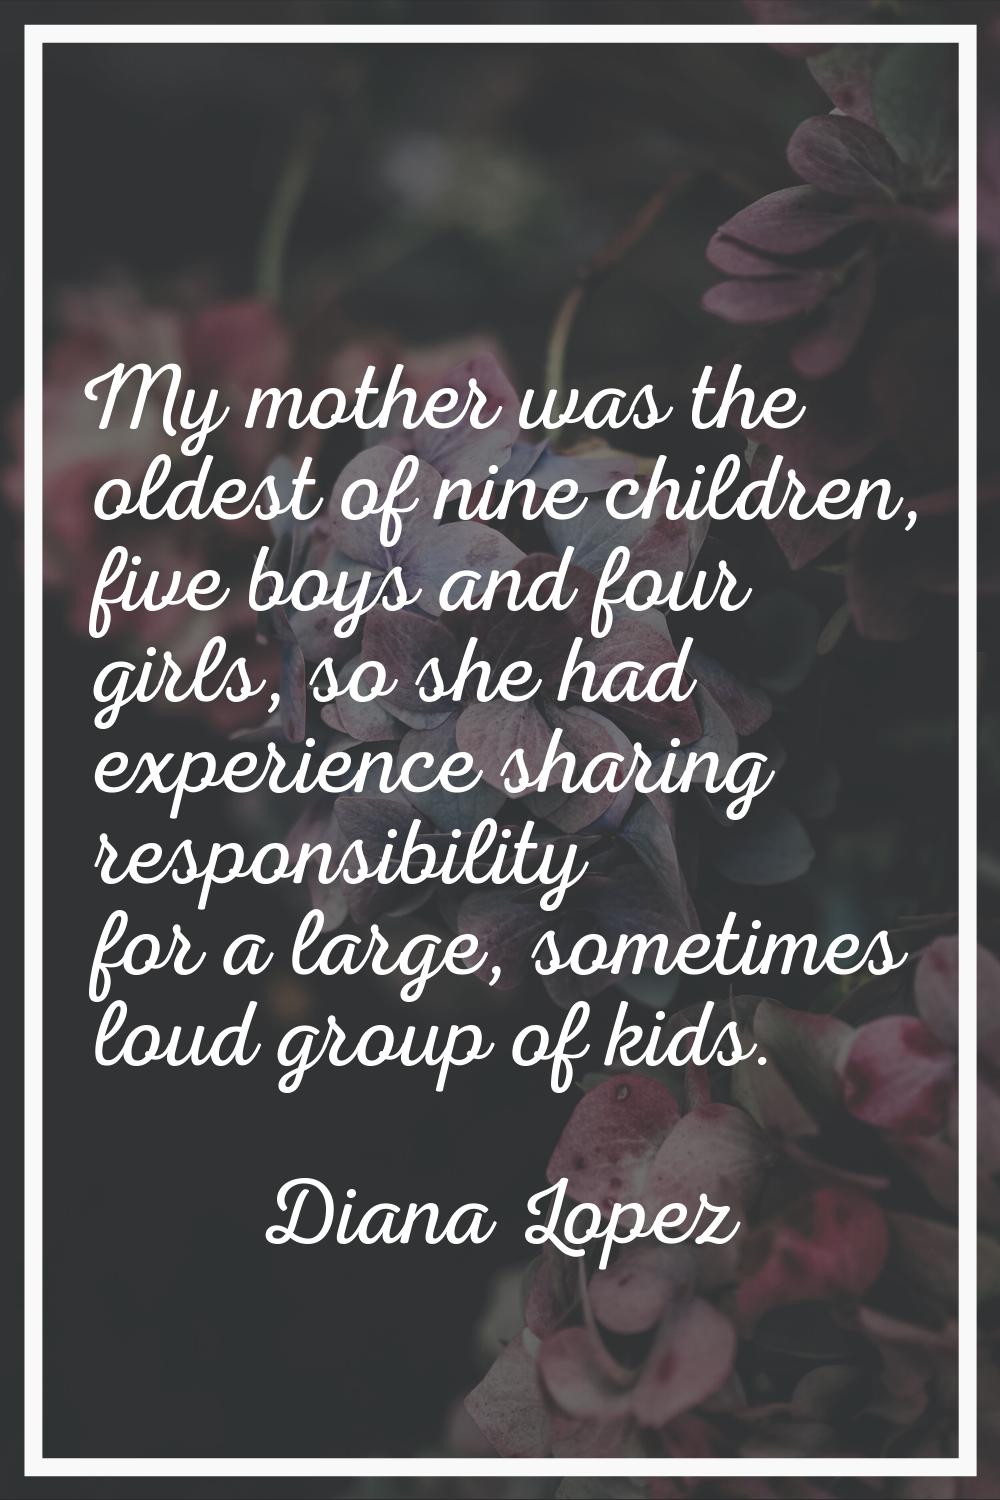 My mother was the oldest of nine children, five boys and four girls, so she had experience sharing 